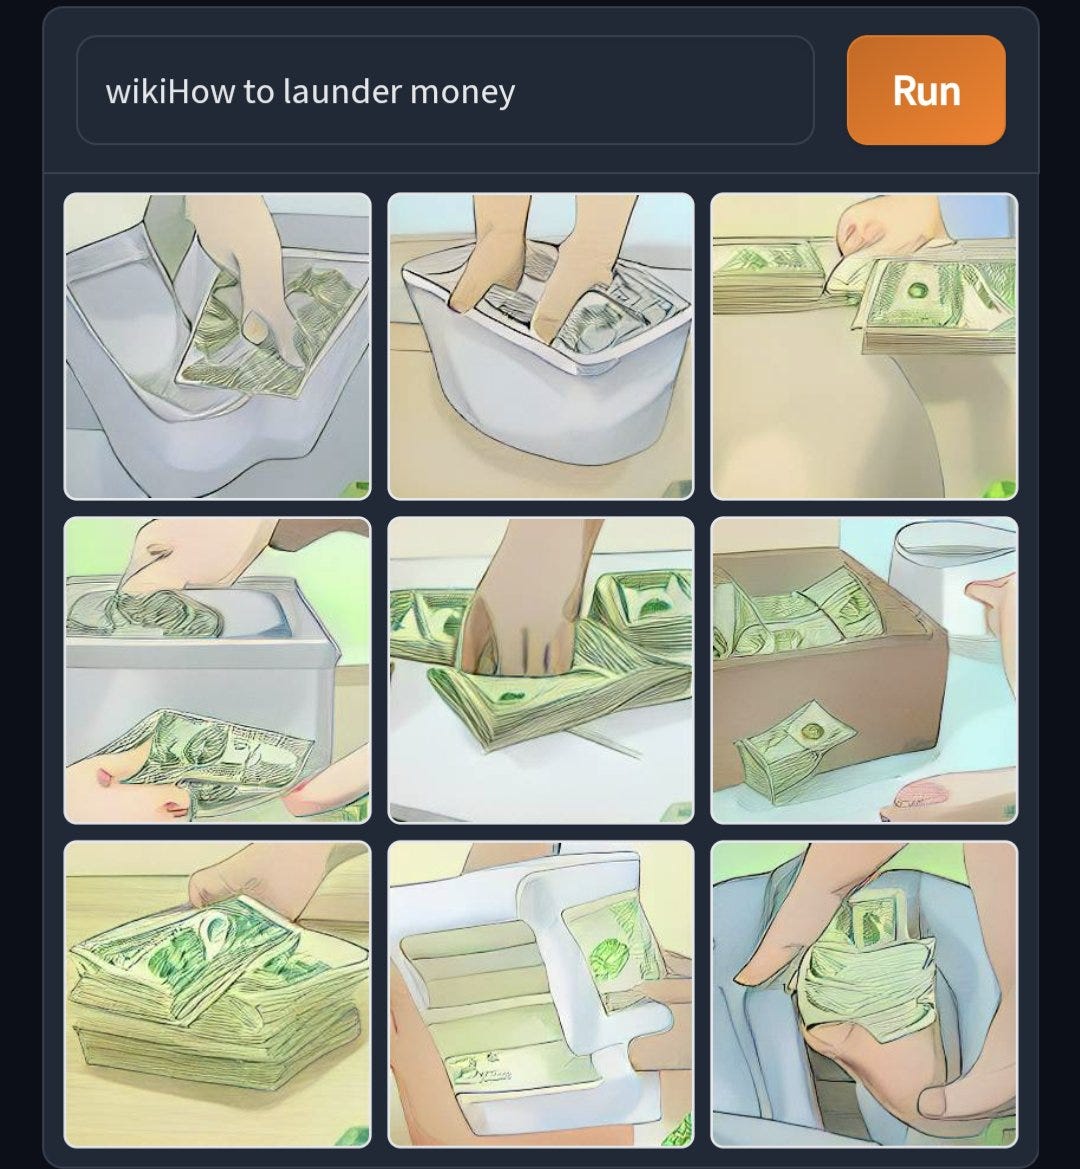 wikiHow to launder money